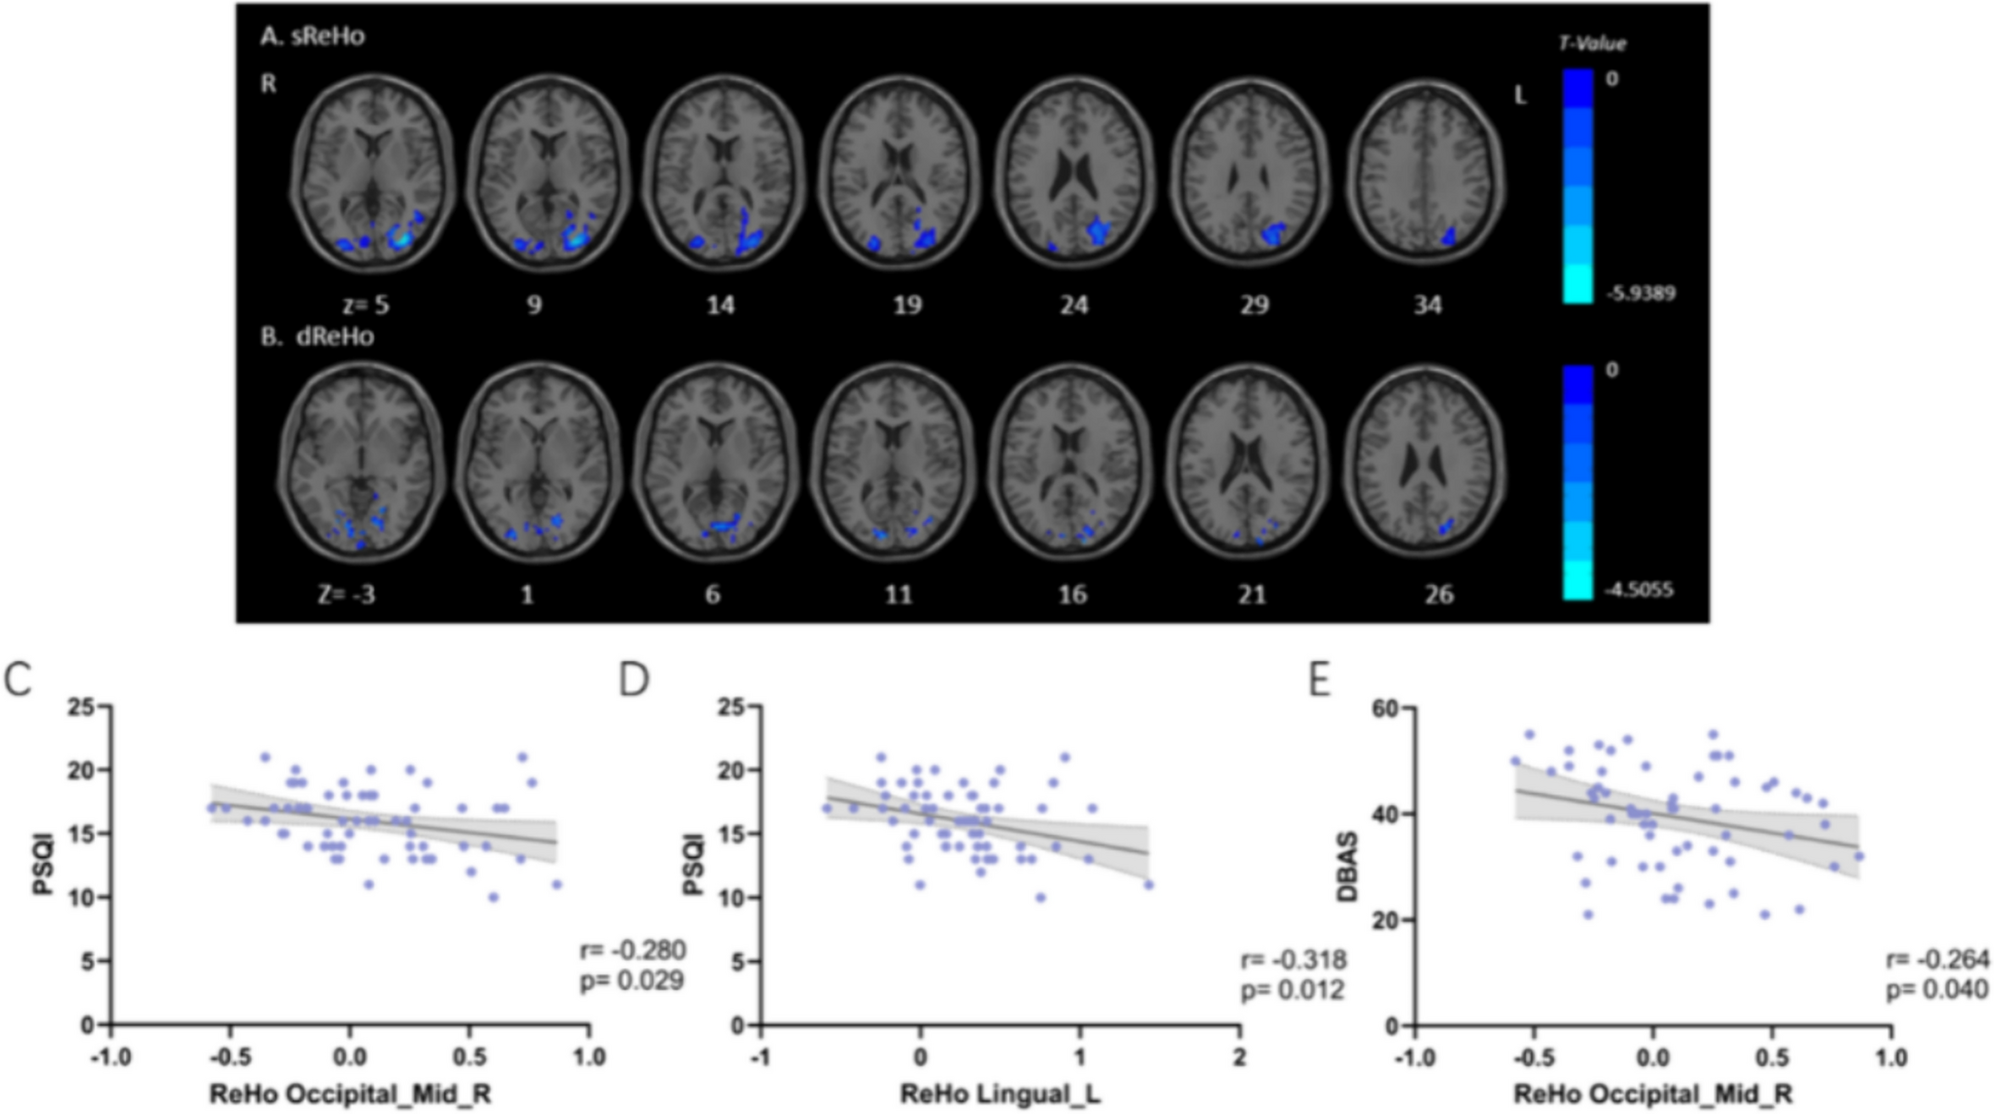 Static and temporal dynamic alterations of regional homogeneity in chronic insomnia: a resting-state fMRI study